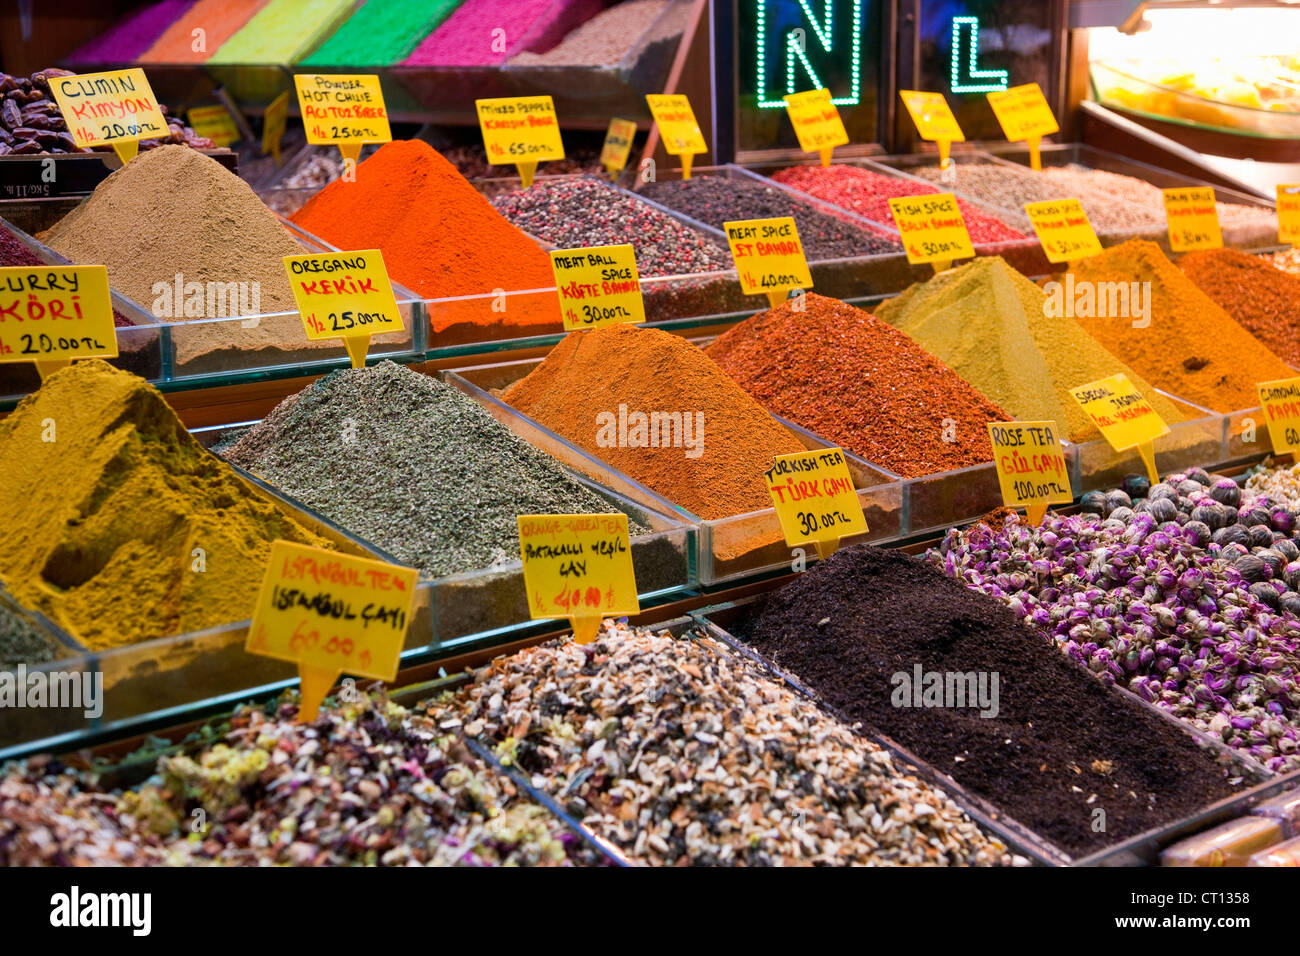 Ground spices for sale Stock Photo